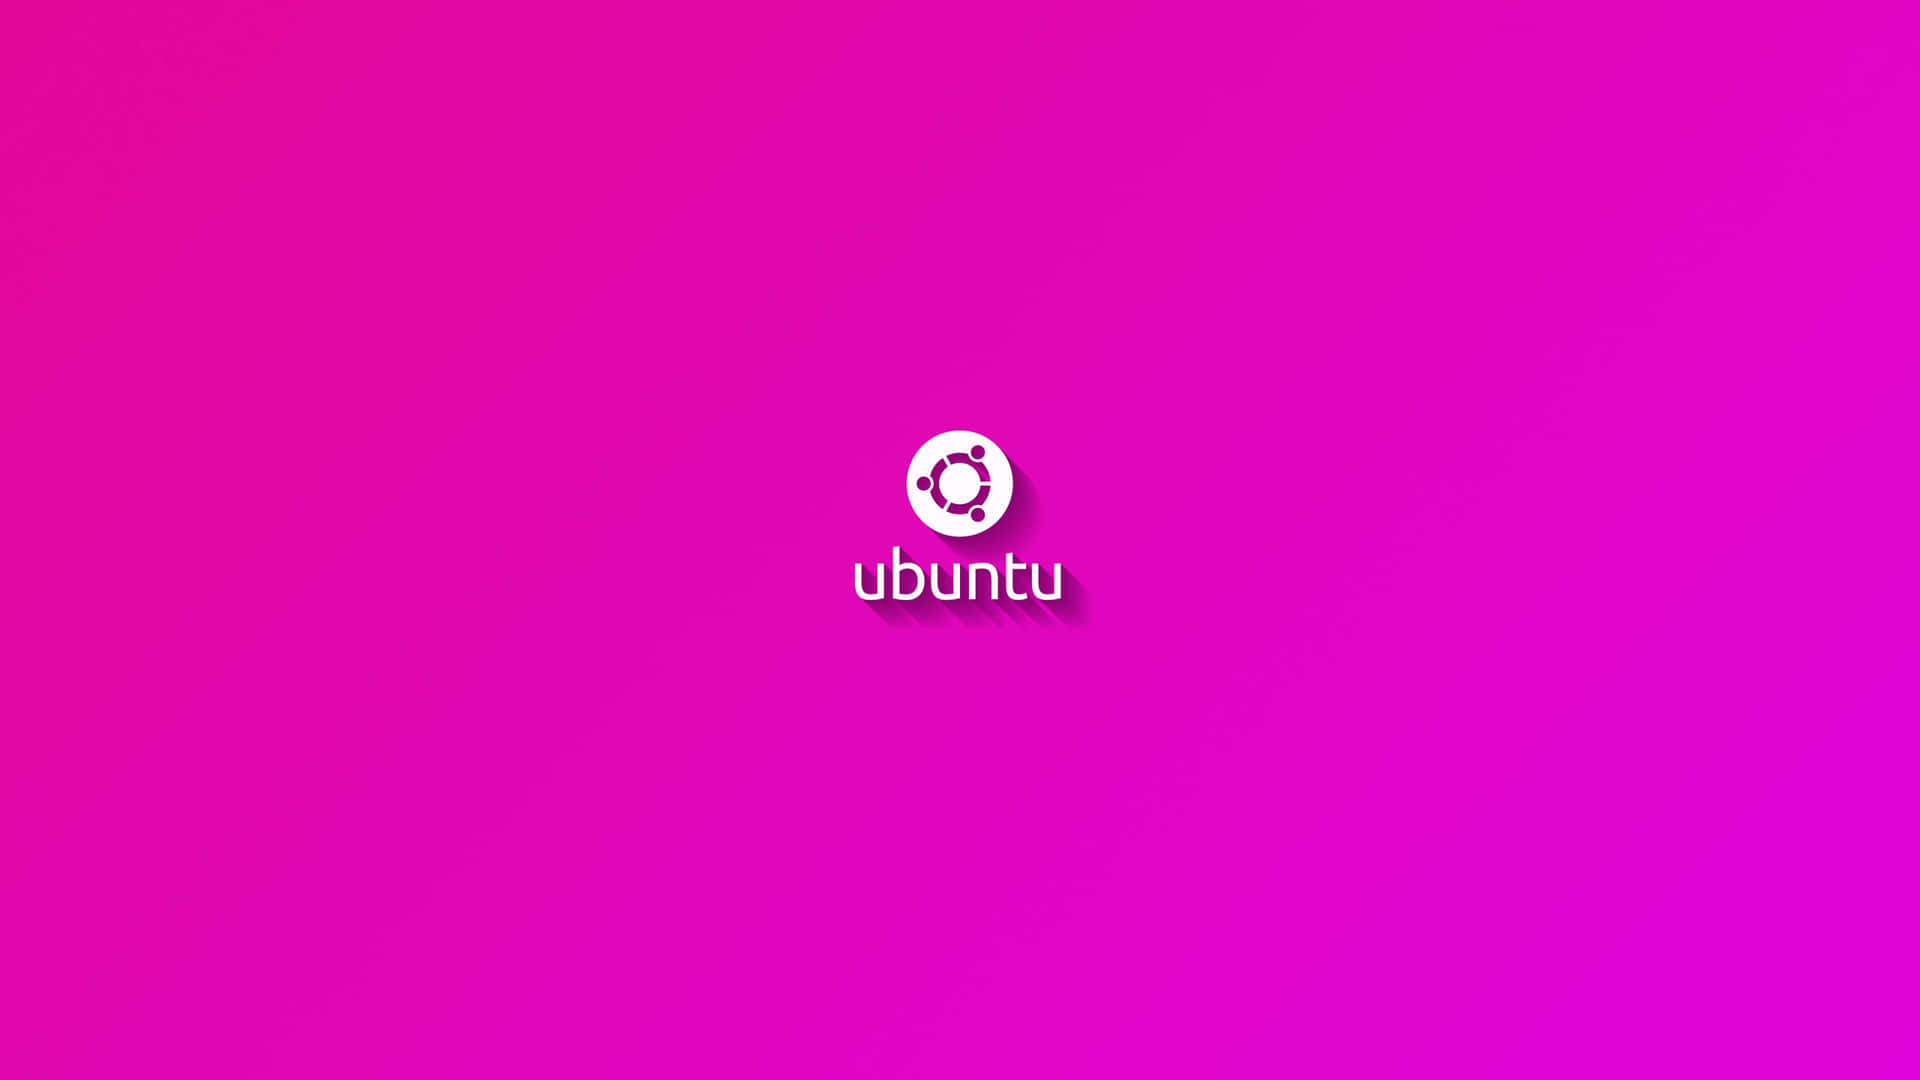 A Pink Background With The Word Ubuntu On It Wallpaper